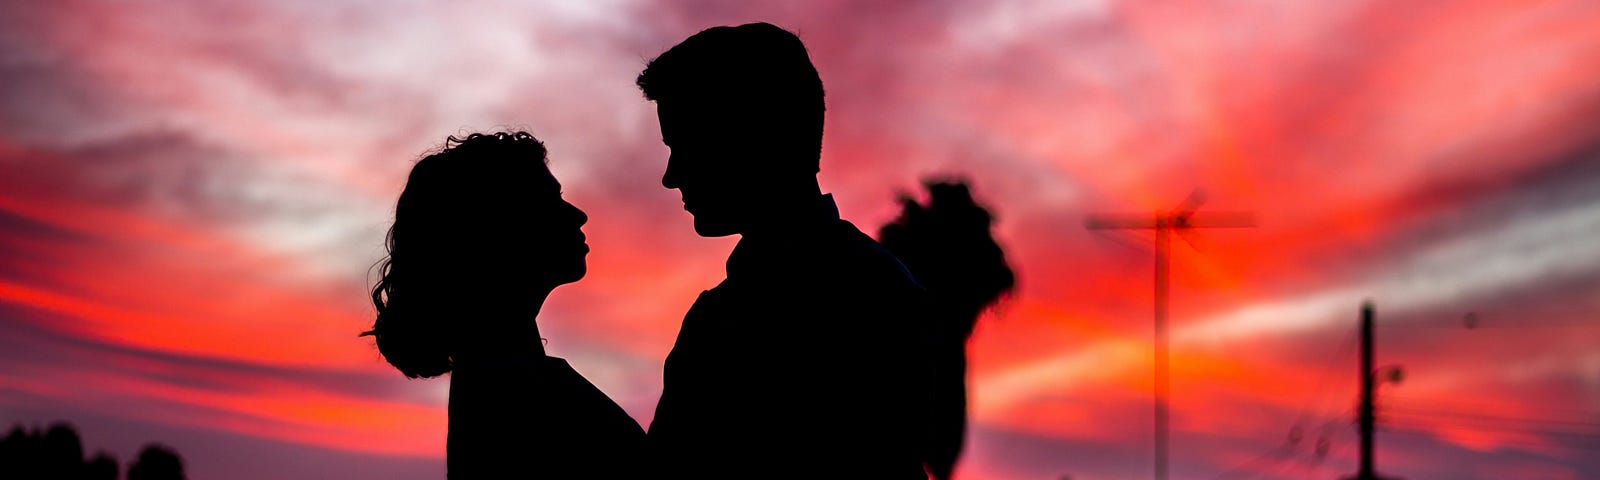 A shadow of a boy and girl looking into each other’s eyes against a purple and red sky backdrop.